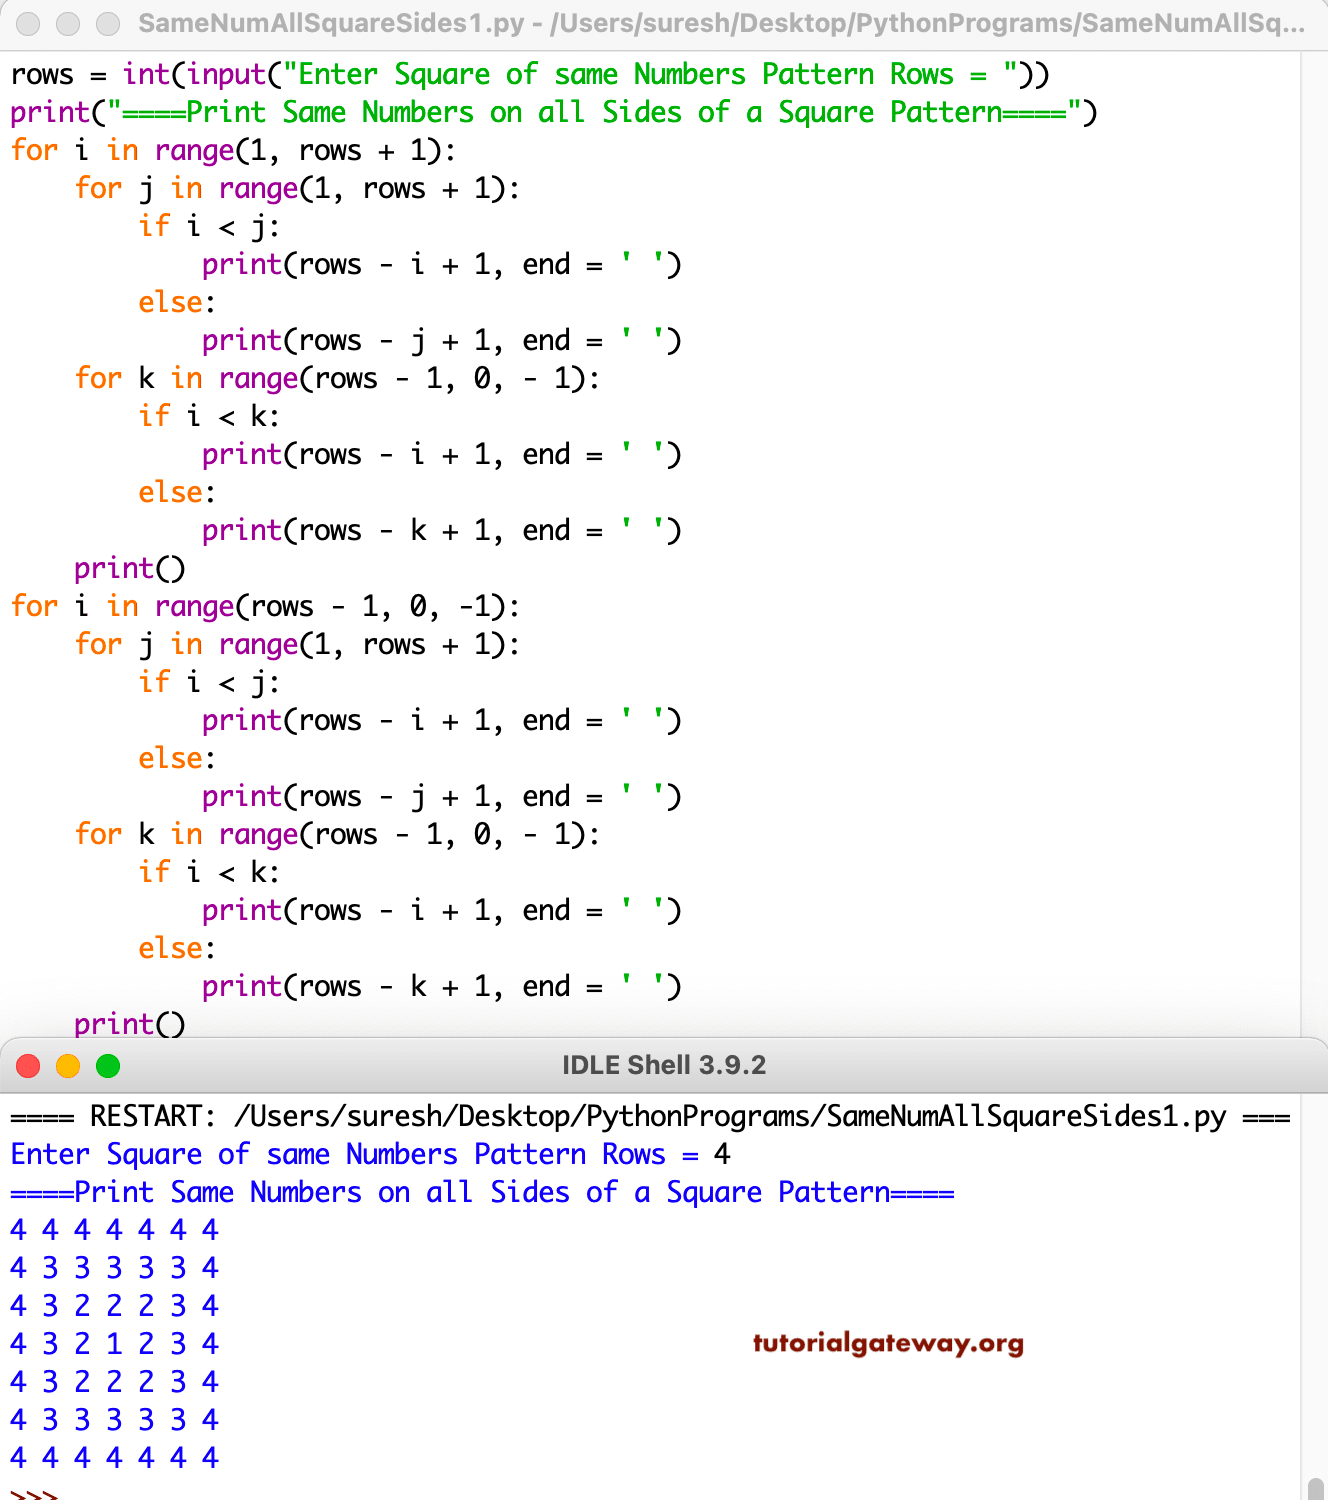 Python Program to Print Same Numbers on all Sides of a Square